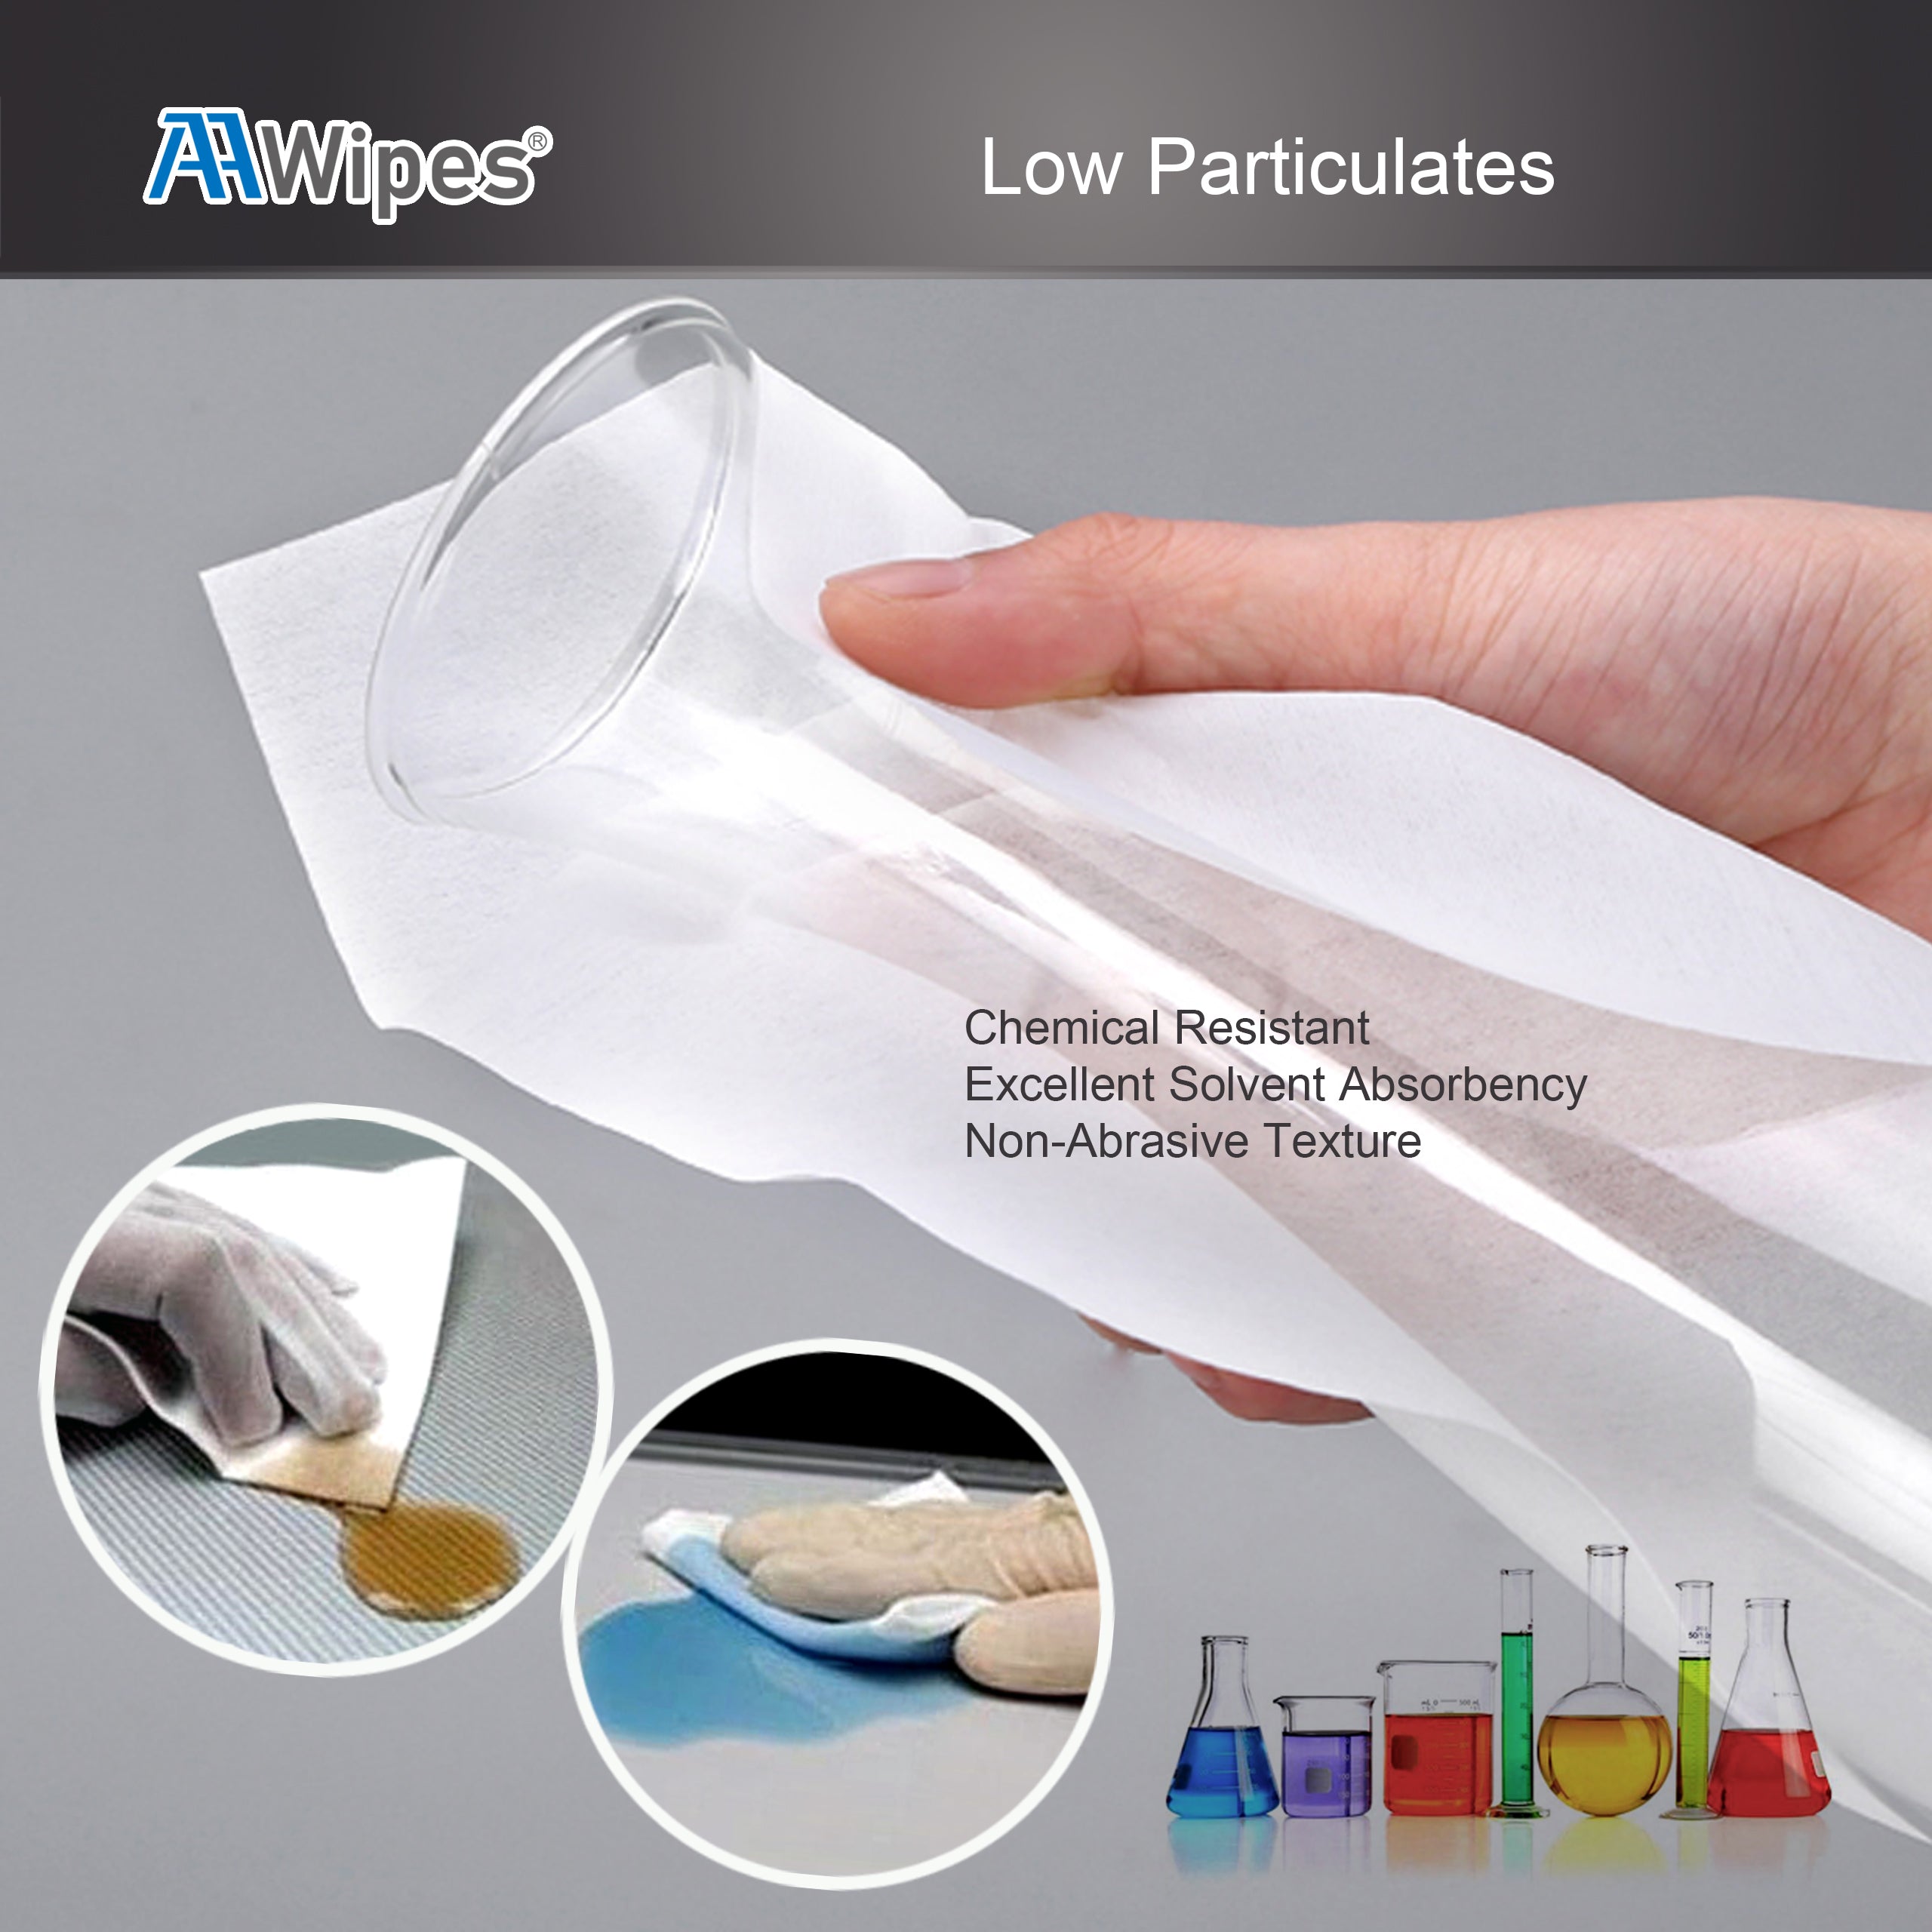 Cleanroom Disposable Cleanroom Wipes: 6"x6" Cellulose/Polyester Nonwoven Wipers for Lab, Electronics, Pharmaceutics, SMT Electronics Factory,Printing and Semiconductor Industries (Professional Grade). 9,000 wipes/box in 30 bags (No. NW06806).